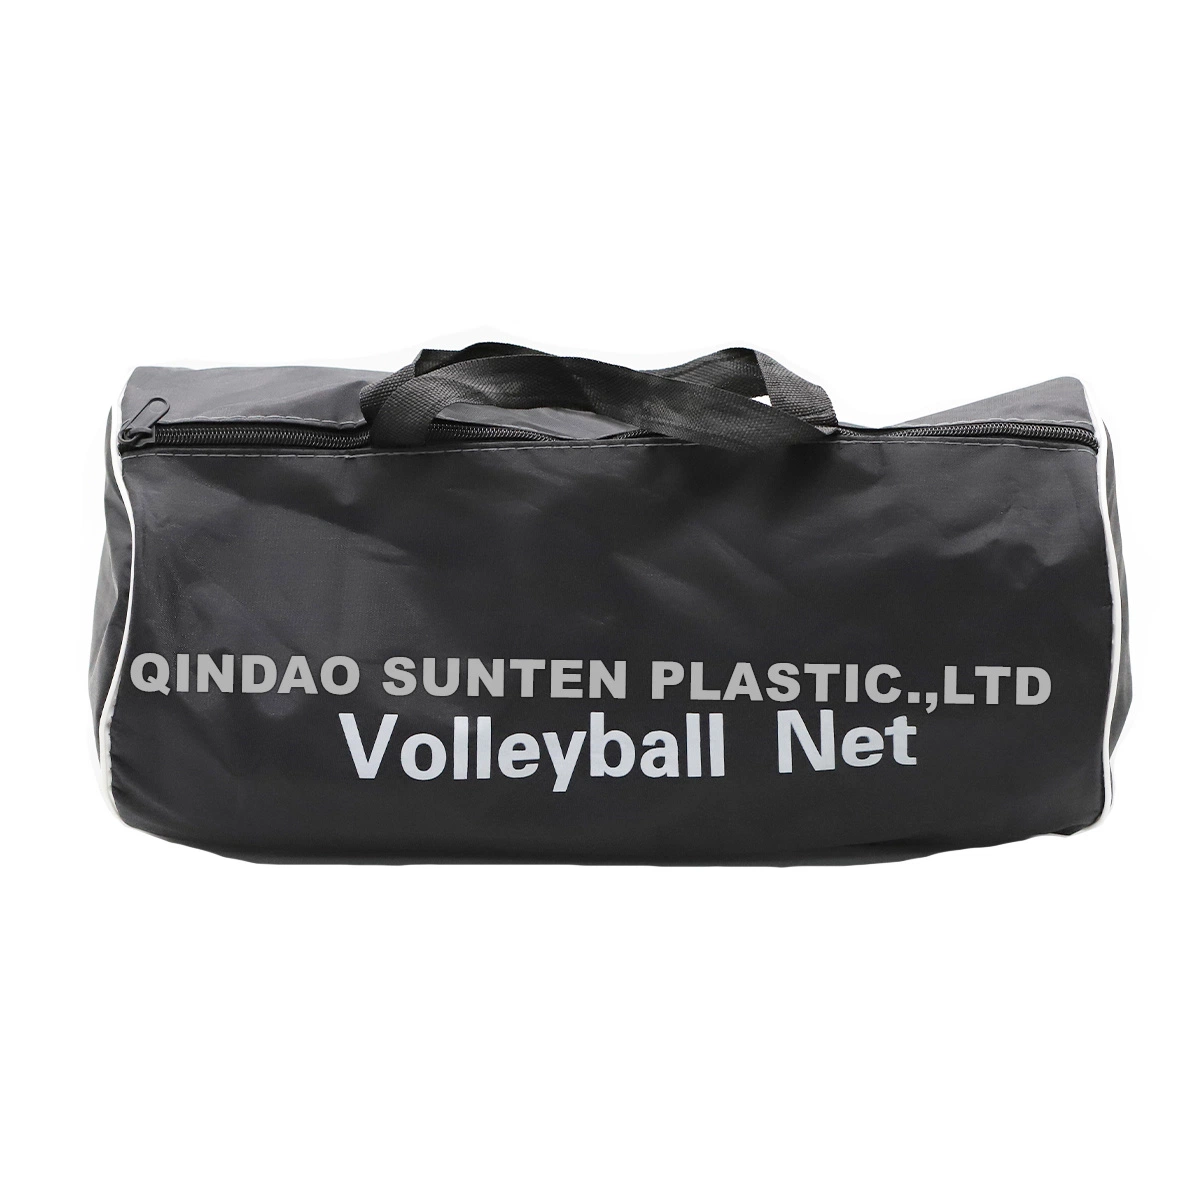 Nylon/PE/PP Volleyball Net 3.5mm Thickness